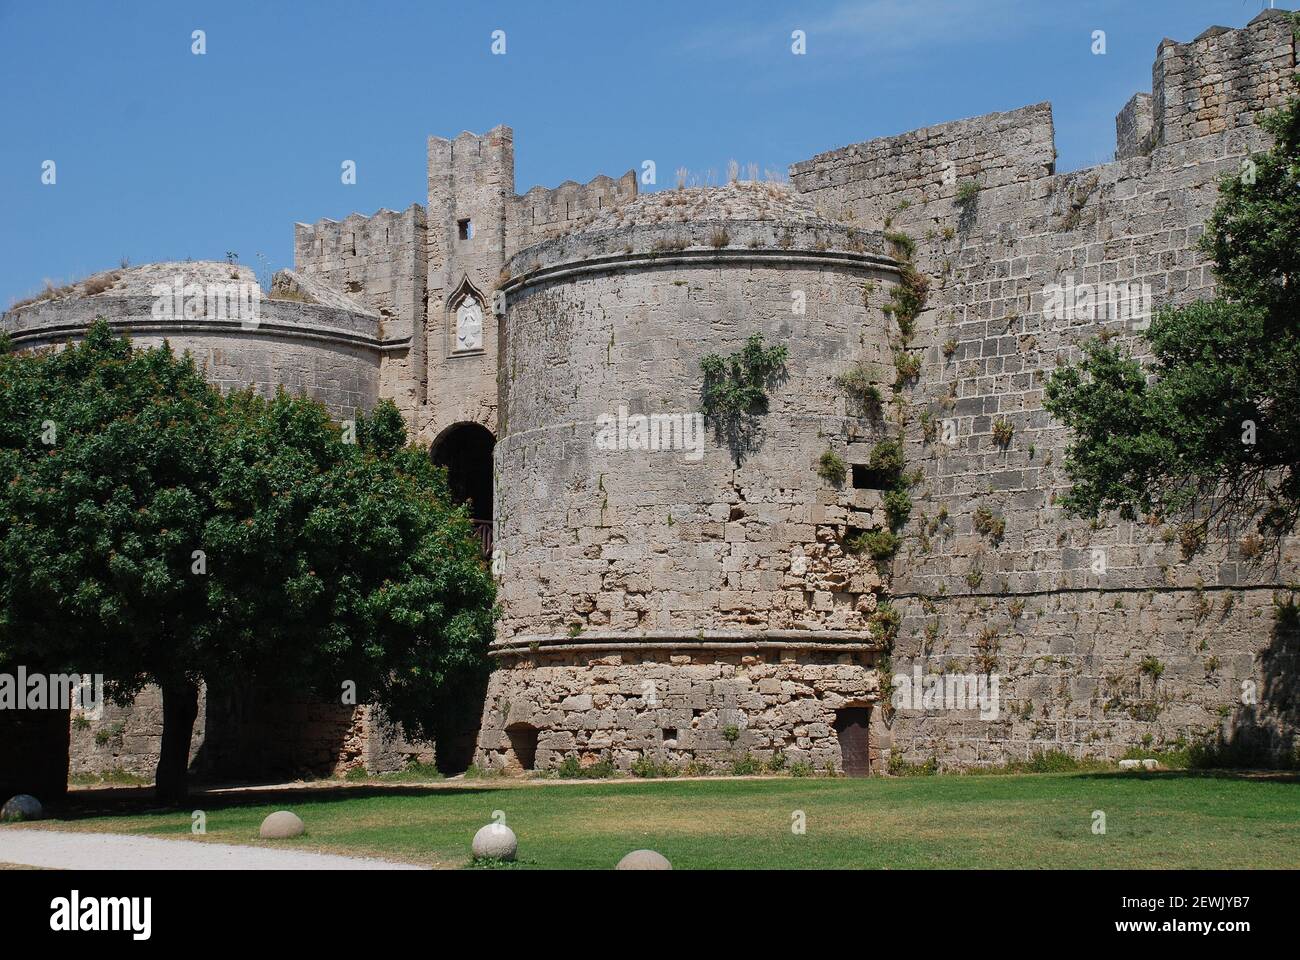 The medieval fortified wall surrounding the Old Town on the Greek island of Rhodes. Stock Photo